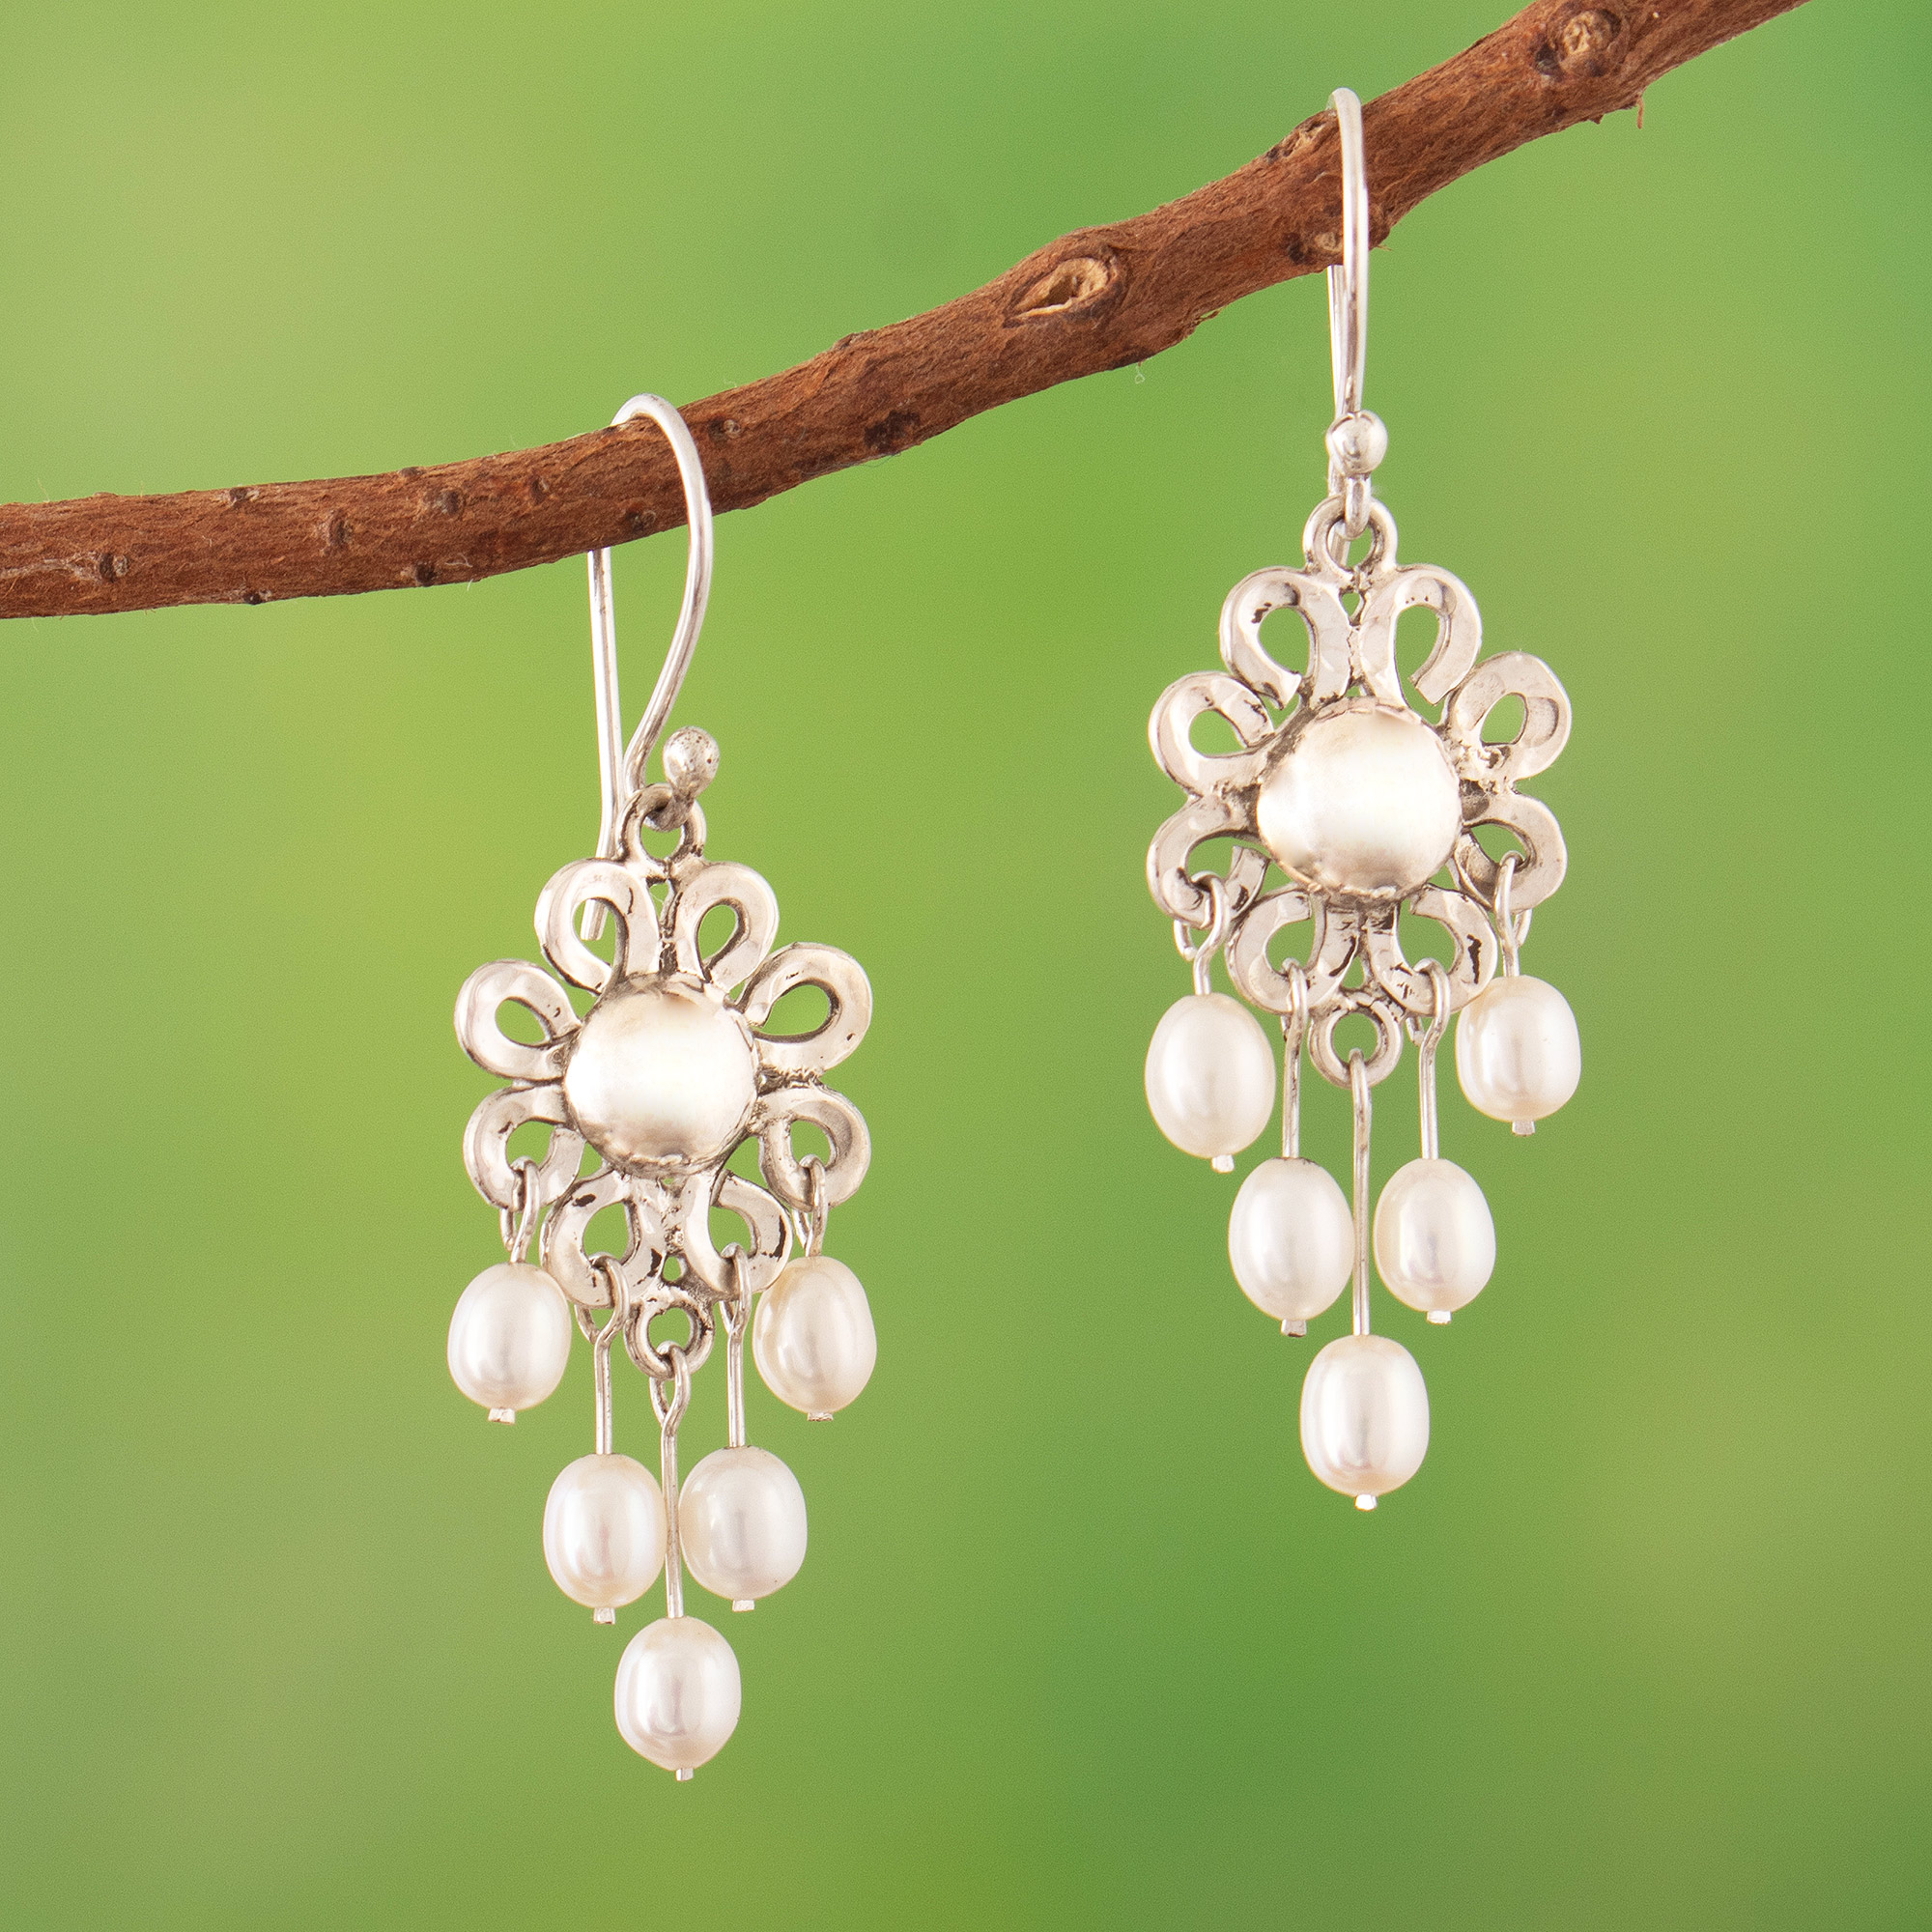 925 Silver Floral Chandelier Earrings with Cultured Pearls - Lustrous  Flowers | NOVICA